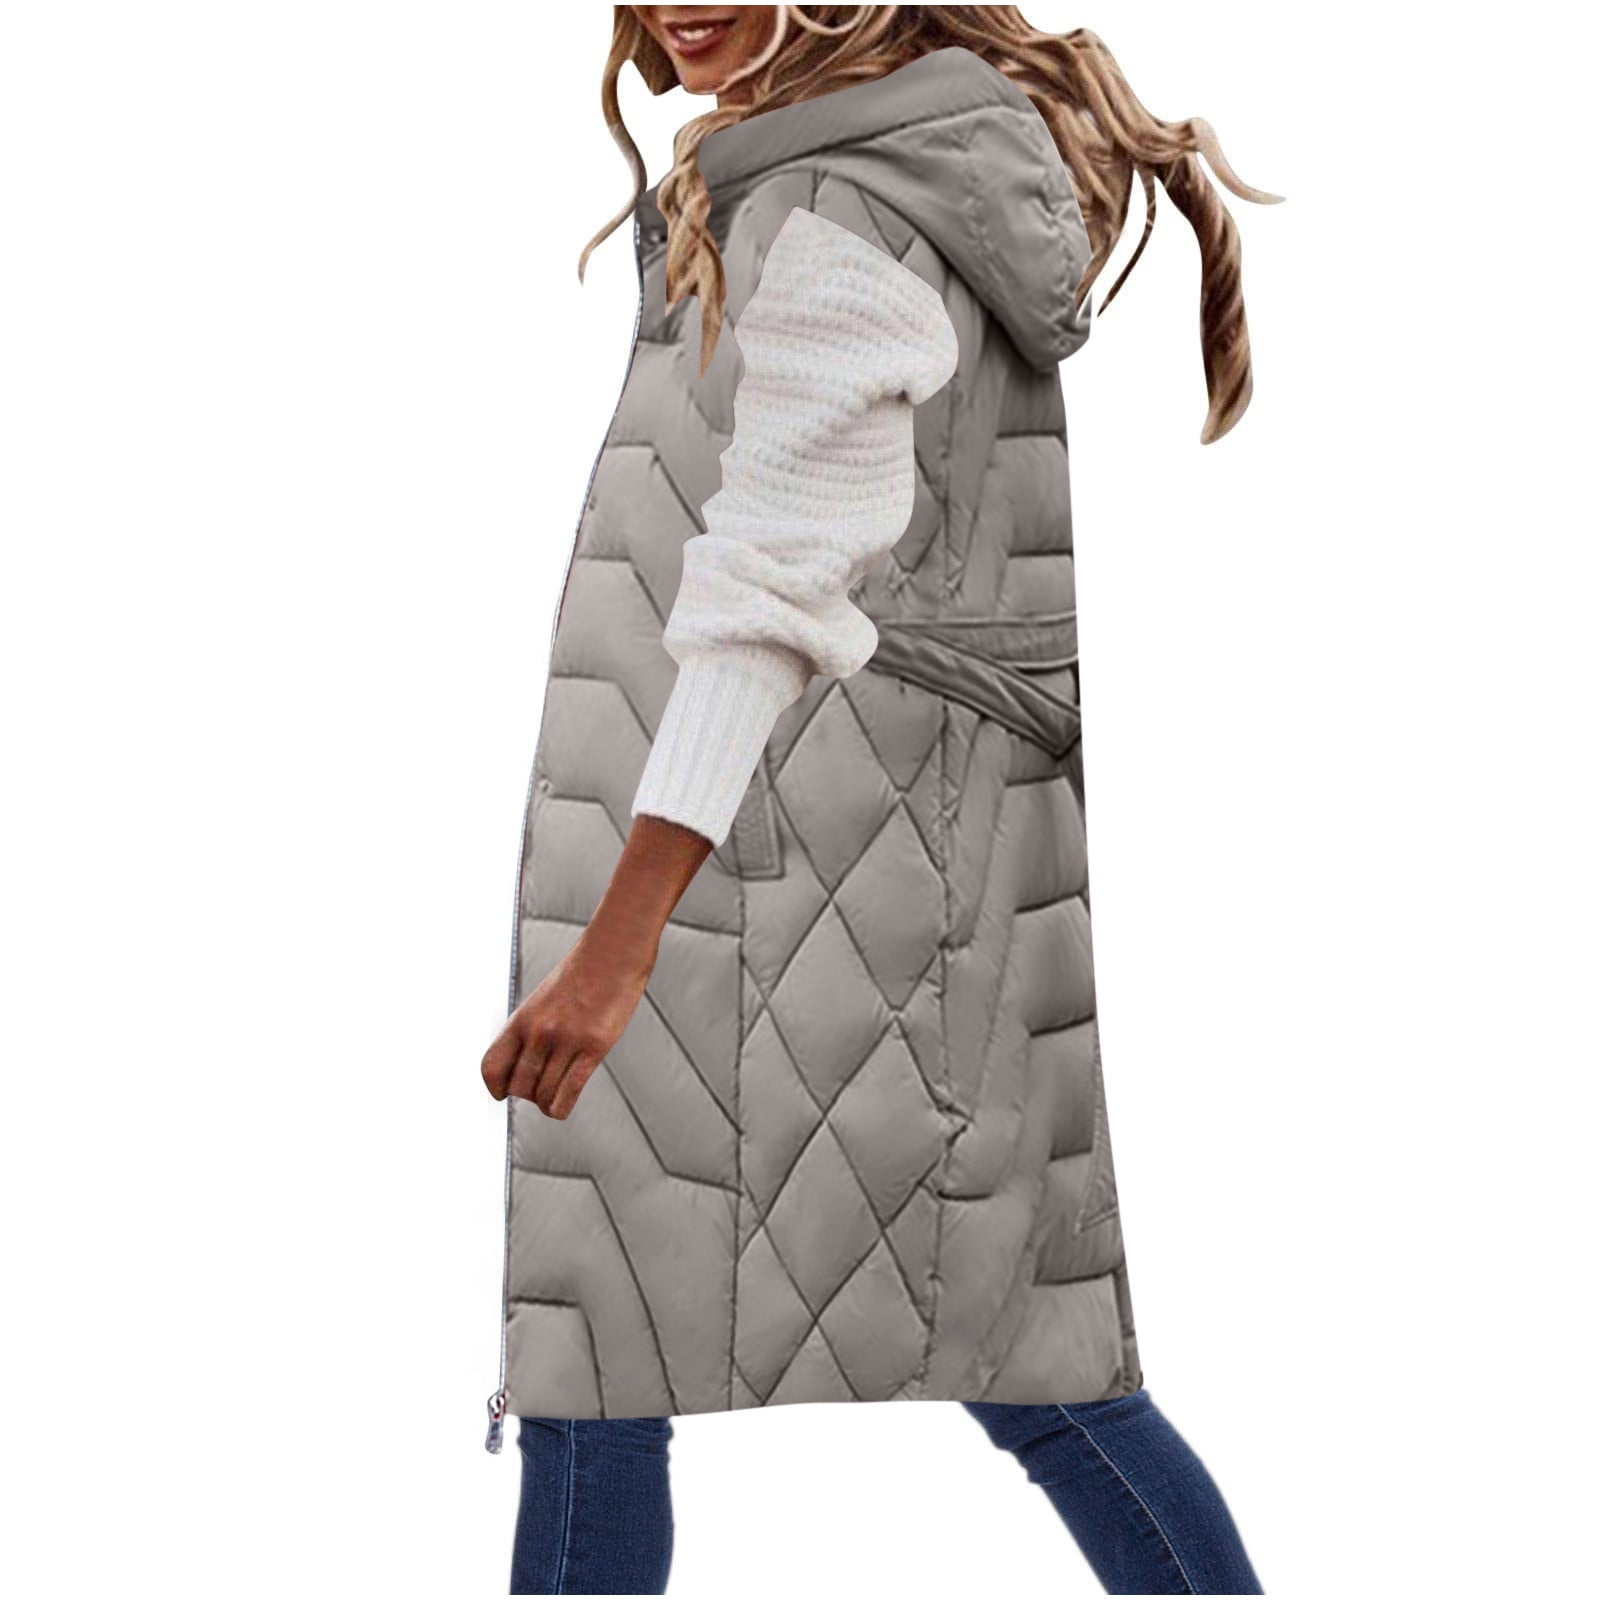 pnroktd Overnight Delivery Puffer Vests for Women 2023 Sleeveless Zip up  Warm Puffer Jacket Lightweight Solid down Jackets Coats Pockets at   Women's Coats Shop